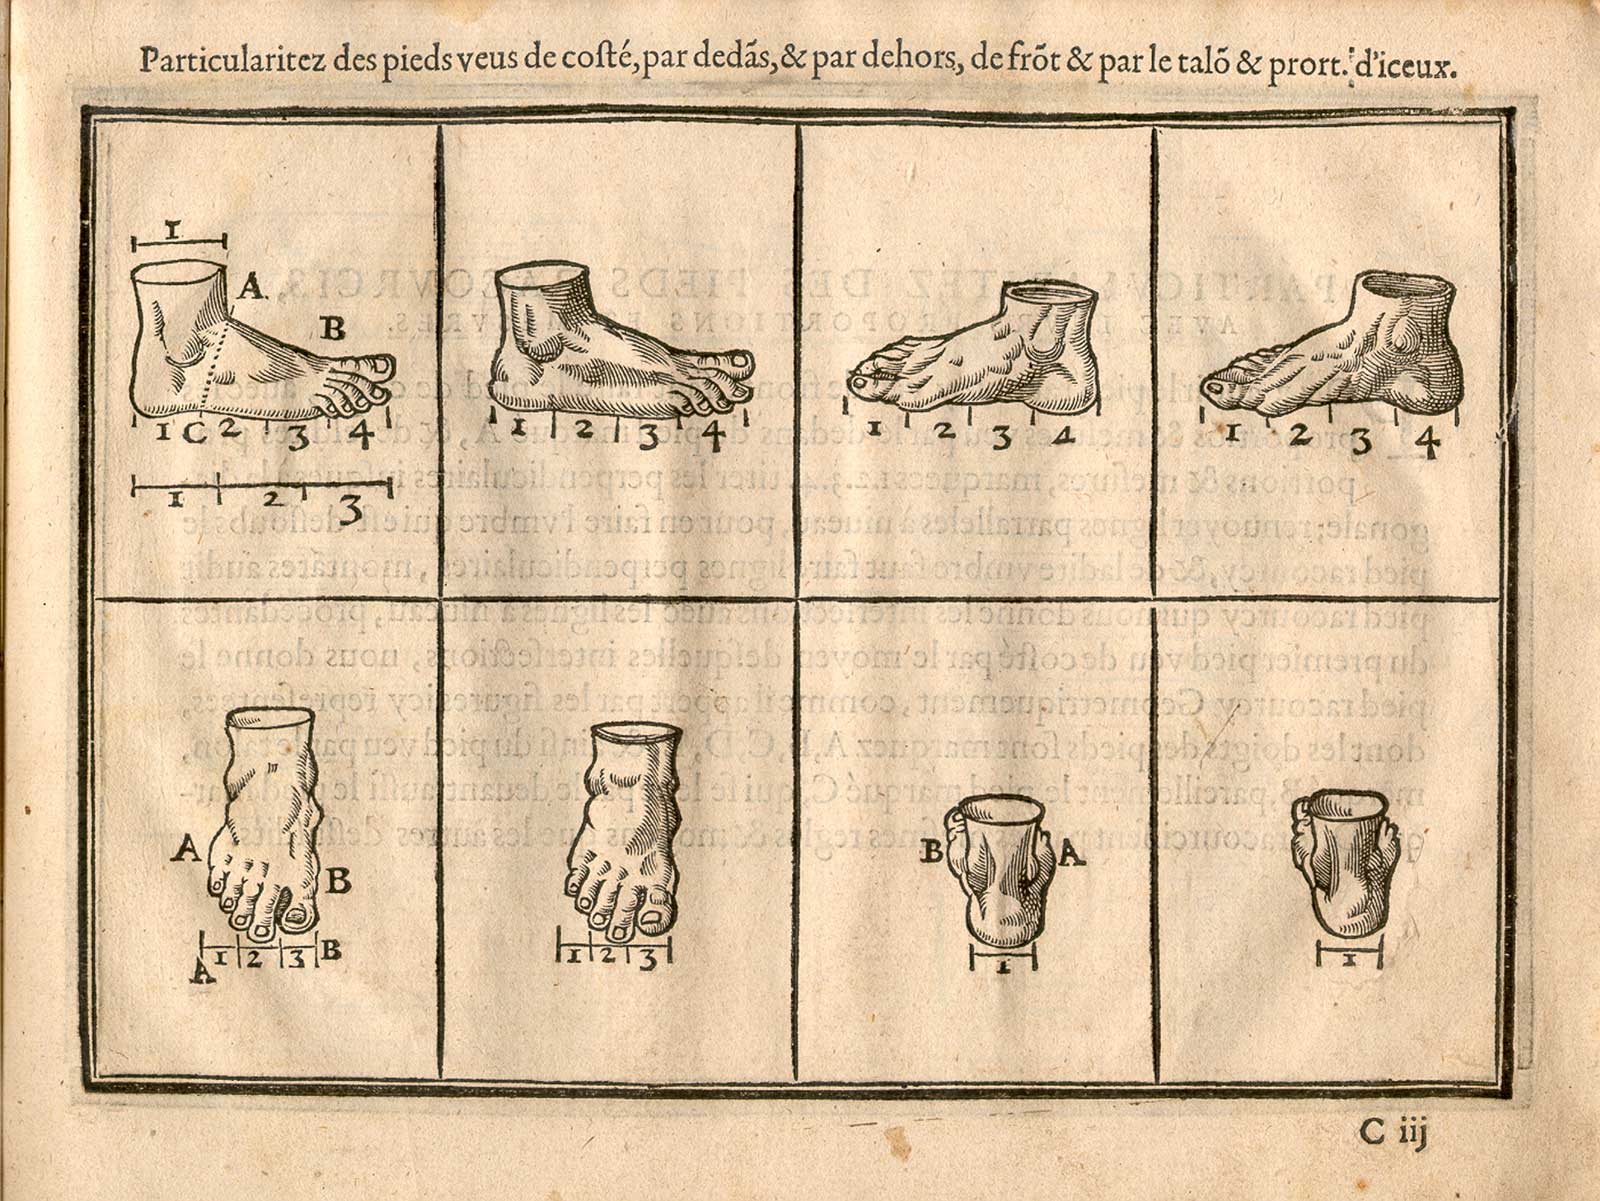 Woodcut illustration of eight feet, mainly flat, viewed from different angles, including the top, the back of the foot, and several different side views, from Jehan Cousin’s Livre de pourtraiture, NLM Call no.: WZ 250 C8673L 1608.